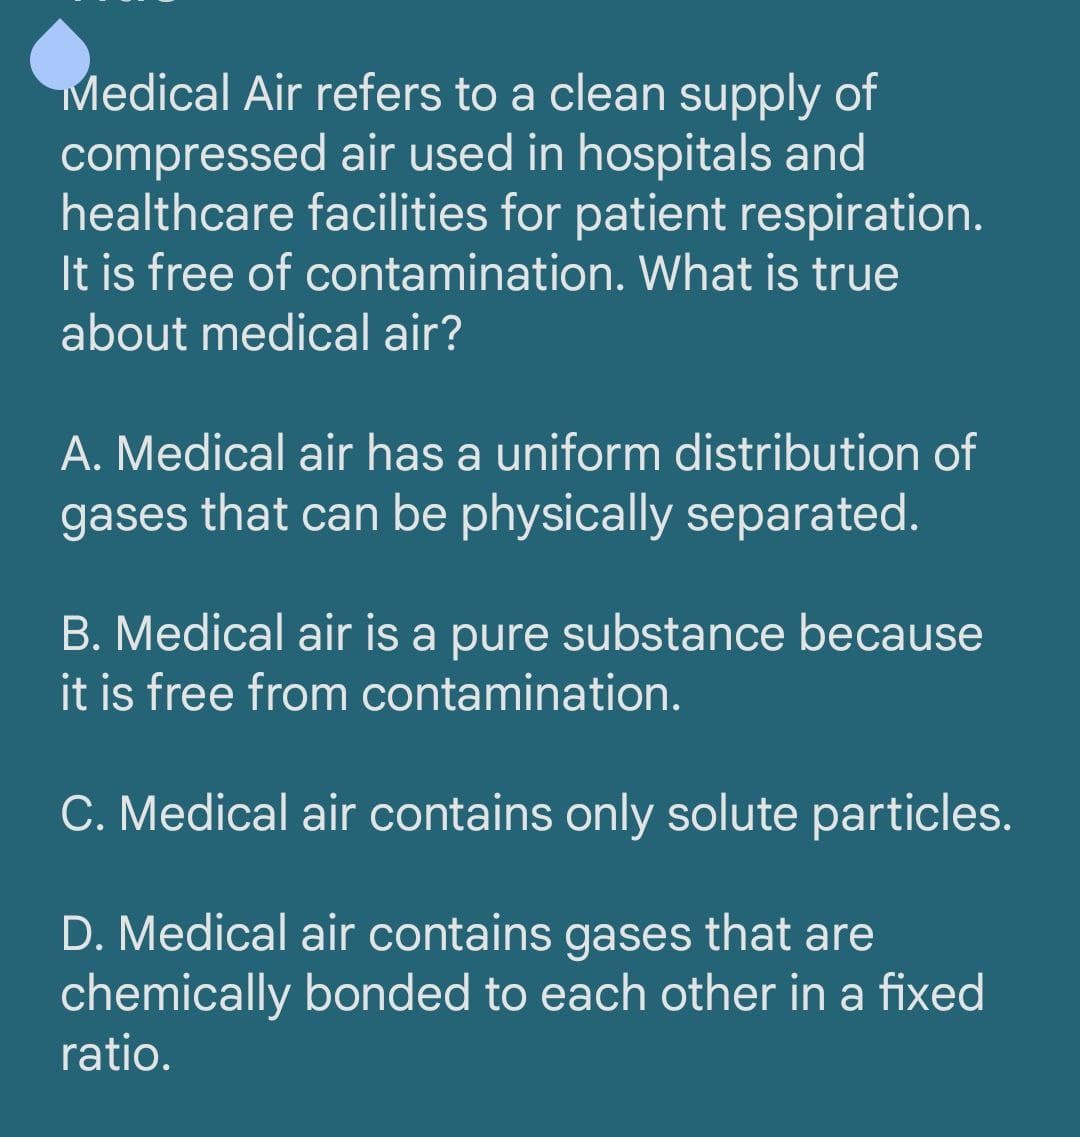 Medical Air refers to a clean supply of
compressed air used in hospitals and
healthcare facilities for patient respiration.
It is free of contamination. What is true
about medical air?
A. Medical air has a uniform distribution of
gases that can be physically separated.
B. Medical air is a pure substance because
it is free from contamination.
C. Medical air contains only solute particles.
D. Medical air contains gases that are
chemically bonded to each other in a fixed
ratio.
